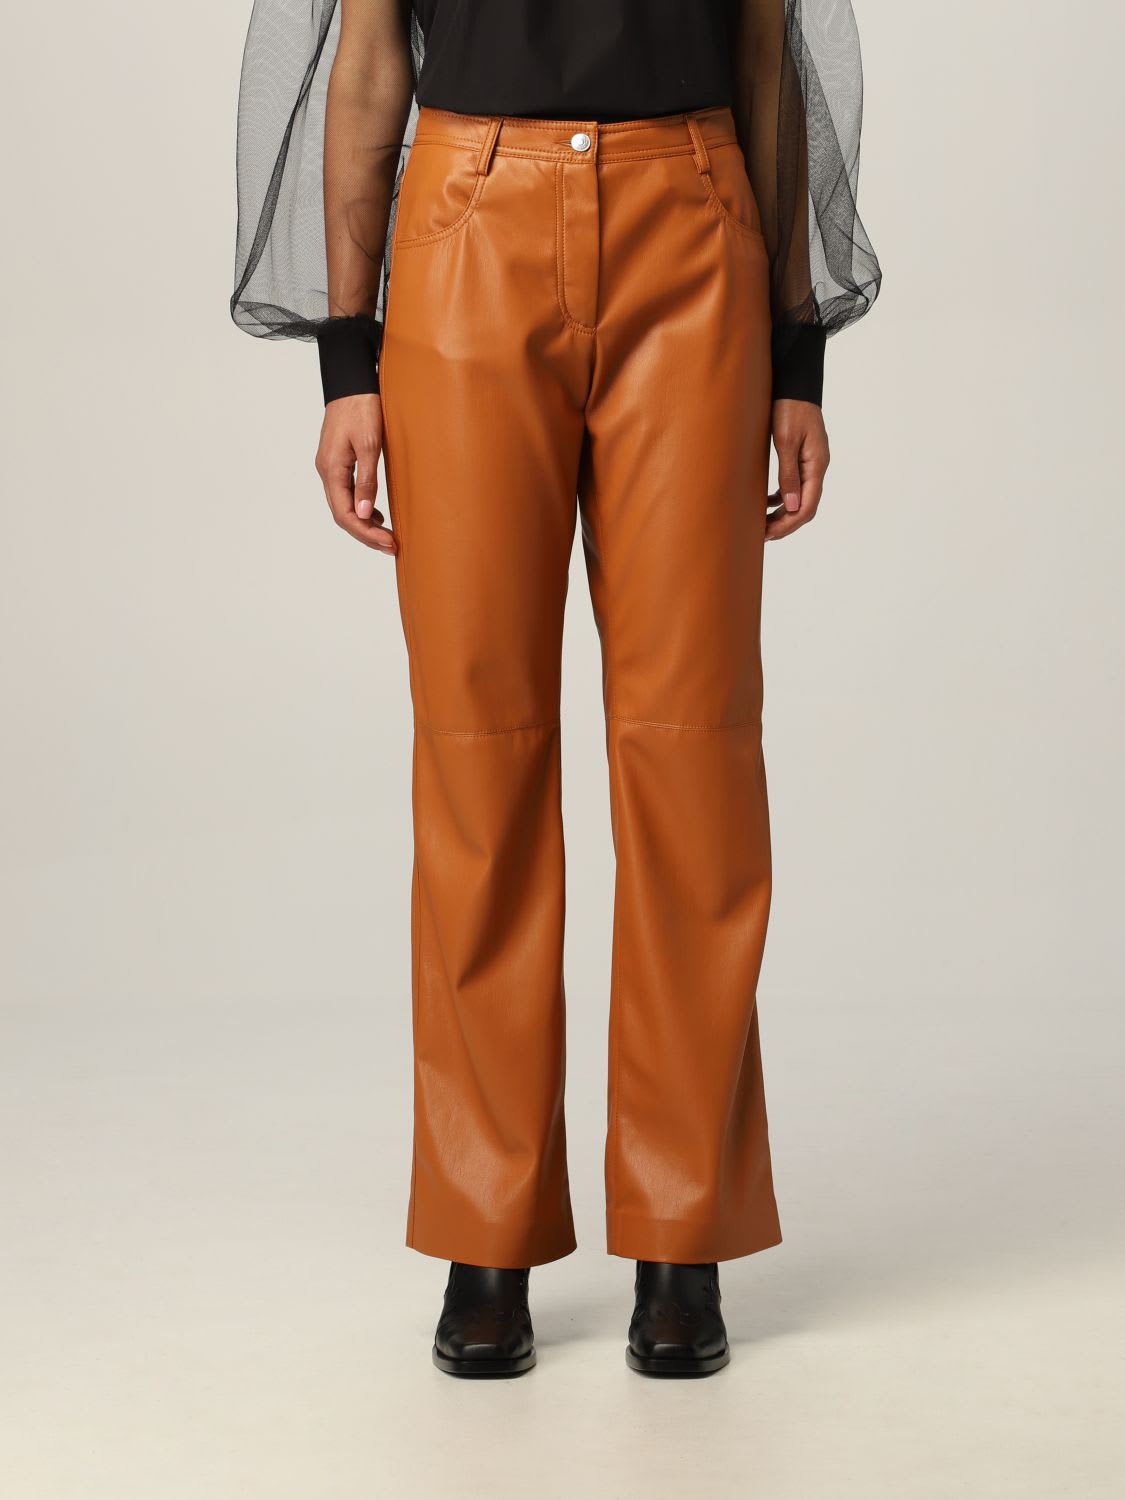 Msgm Pants Msgm Pants In Synthetic Leather